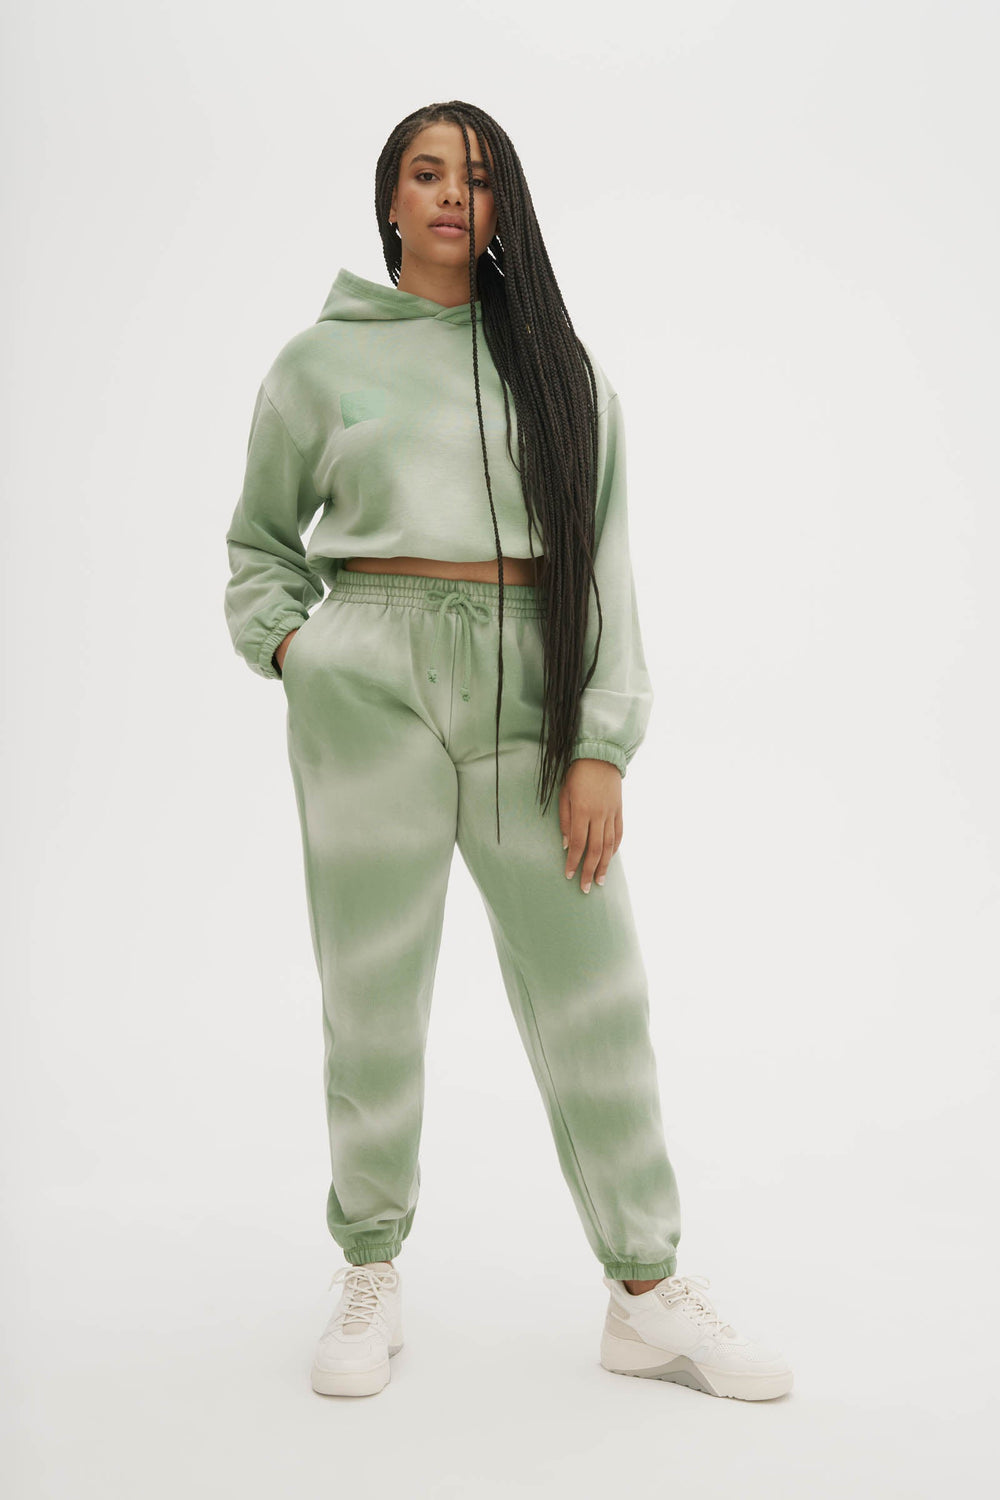 Custom Logo Fall Clothes Stacked Top Pants Tracksuit Women, 42% OFF